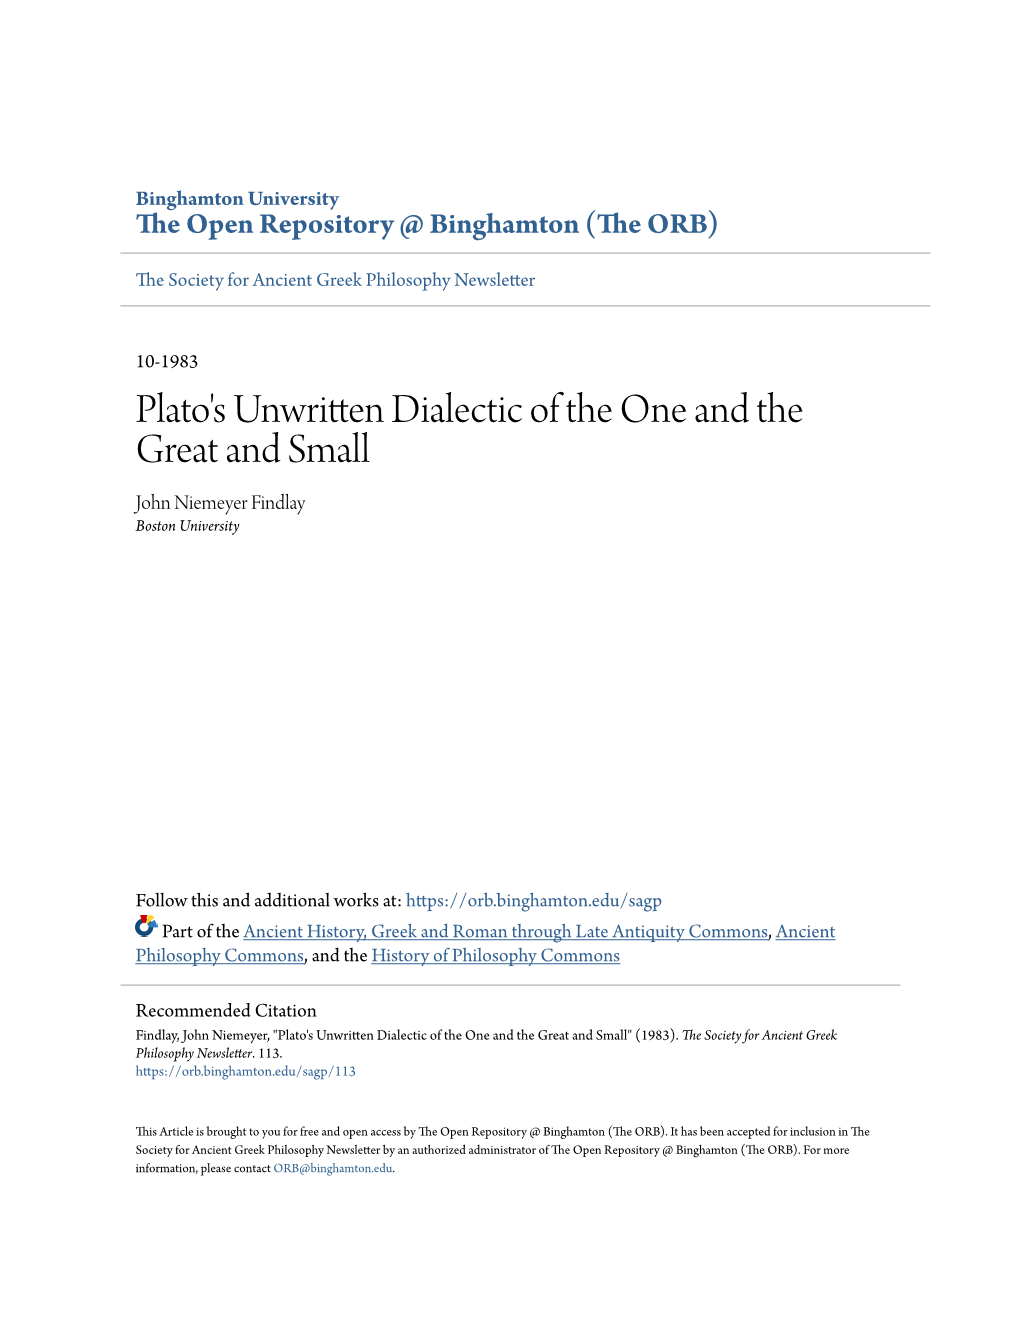 Plato's Unwritten Dialectic of the One and the Great and Small John Niemeyer Findlay Boston University